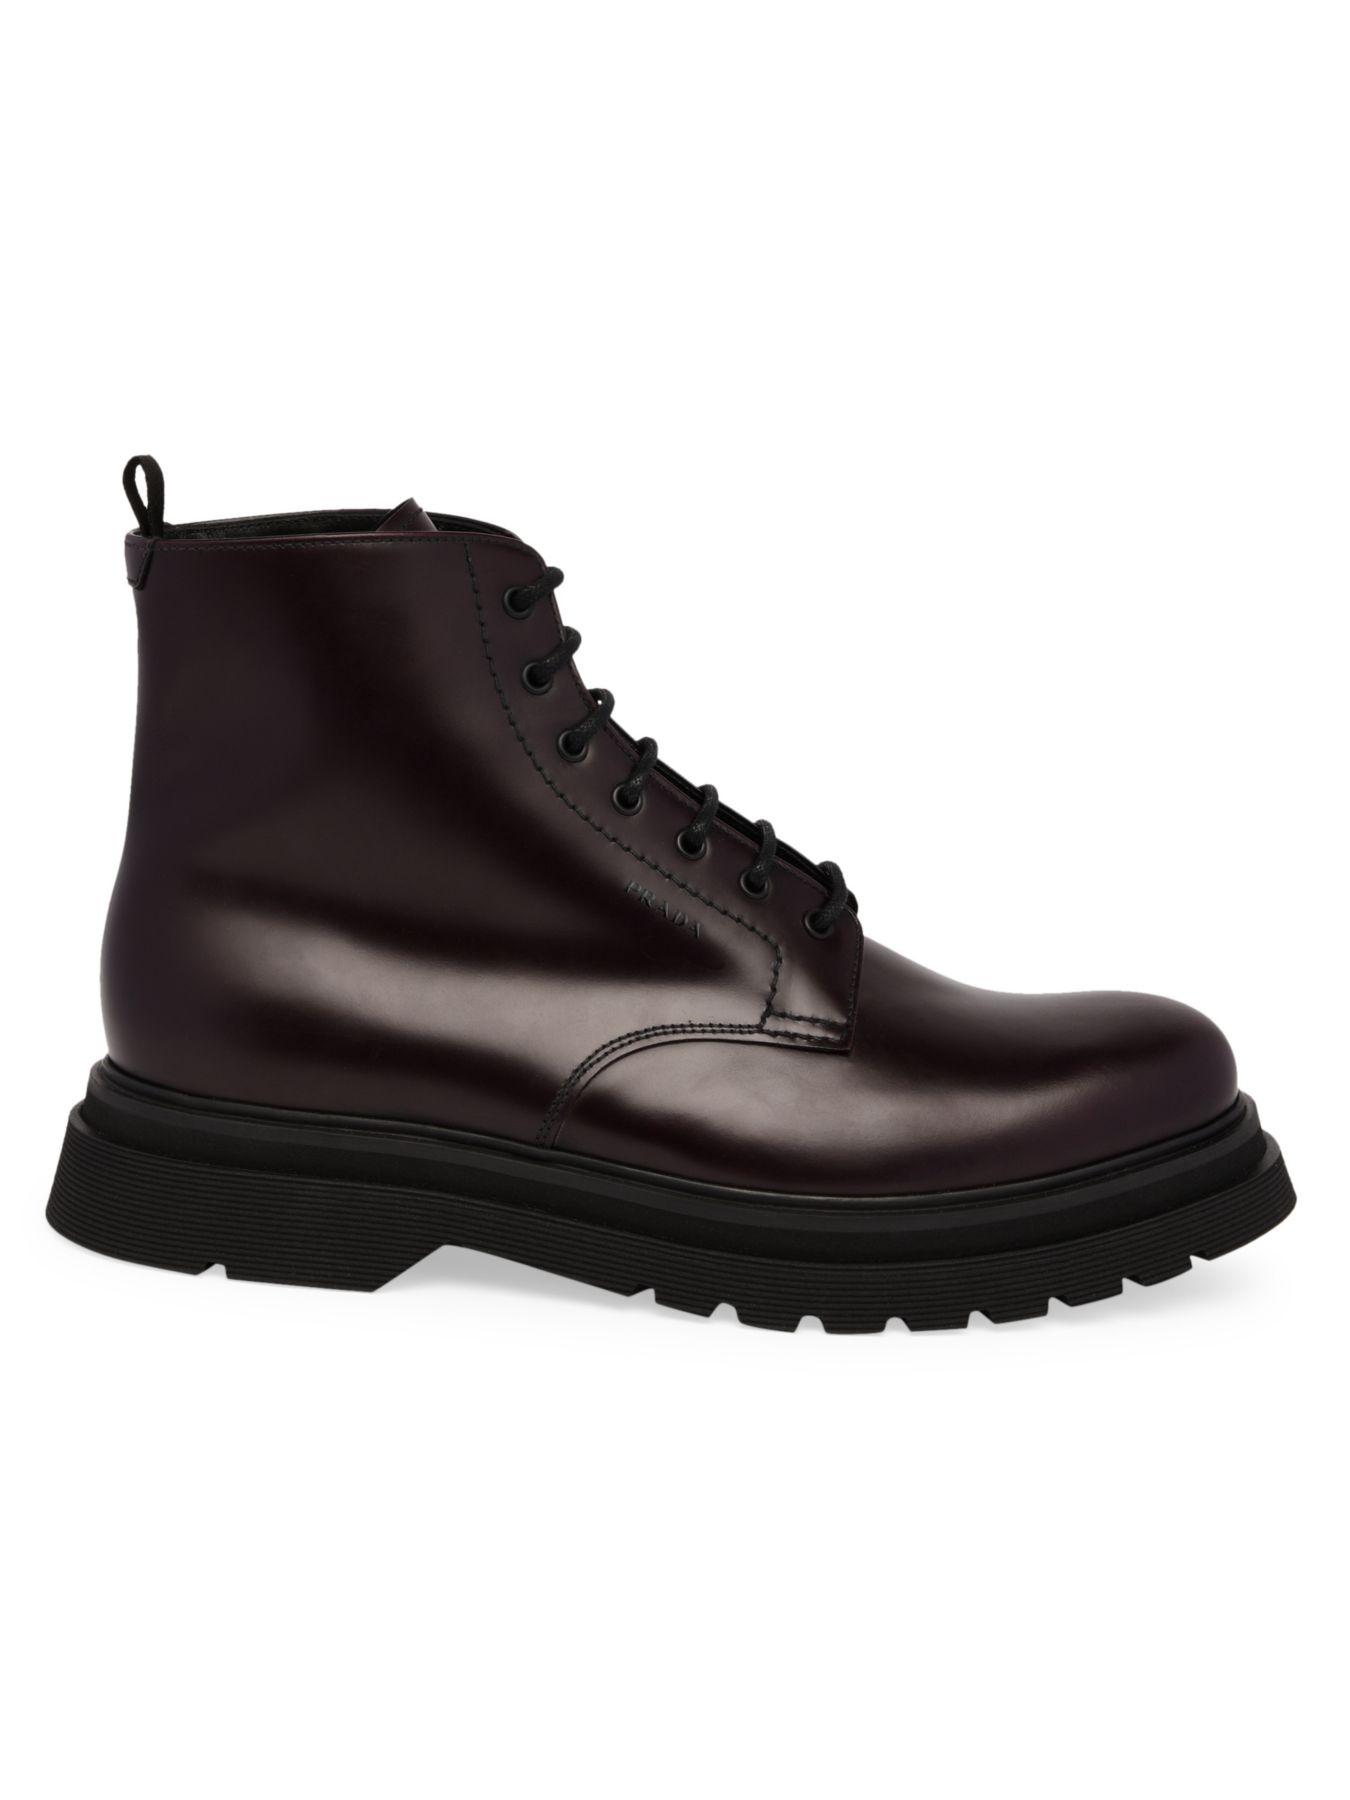 Prada Spazzolato Rois Leather Lace-up Combat Boots in Black for Men - Lyst